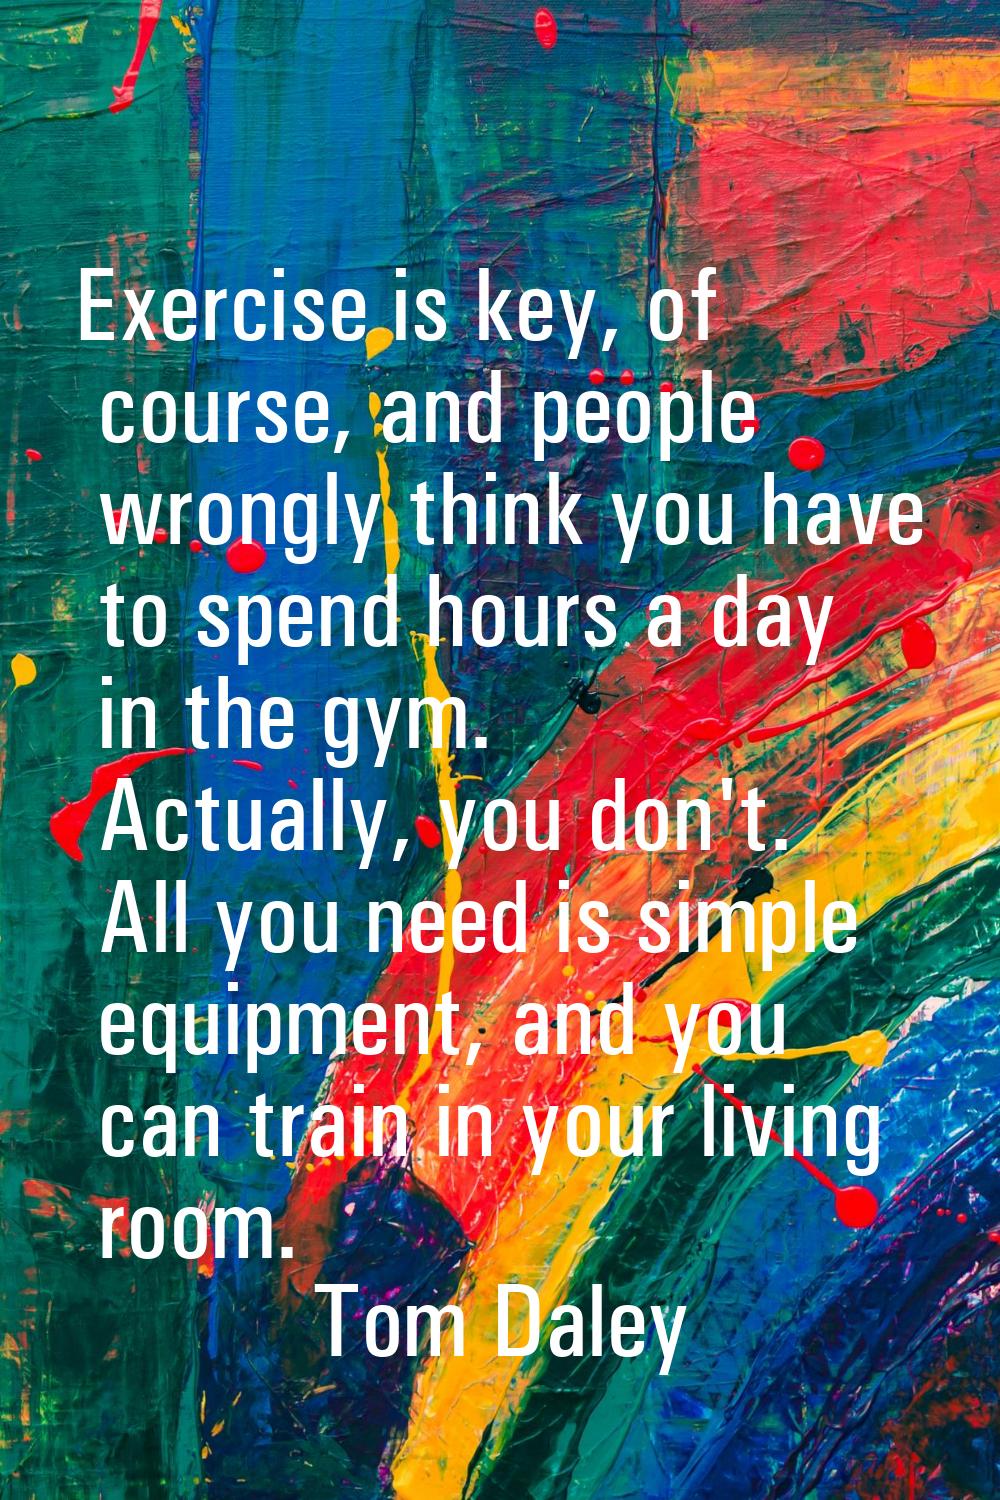 Exercise is key, of course, and people wrongly think you have to spend hours a day in the gym. Actu